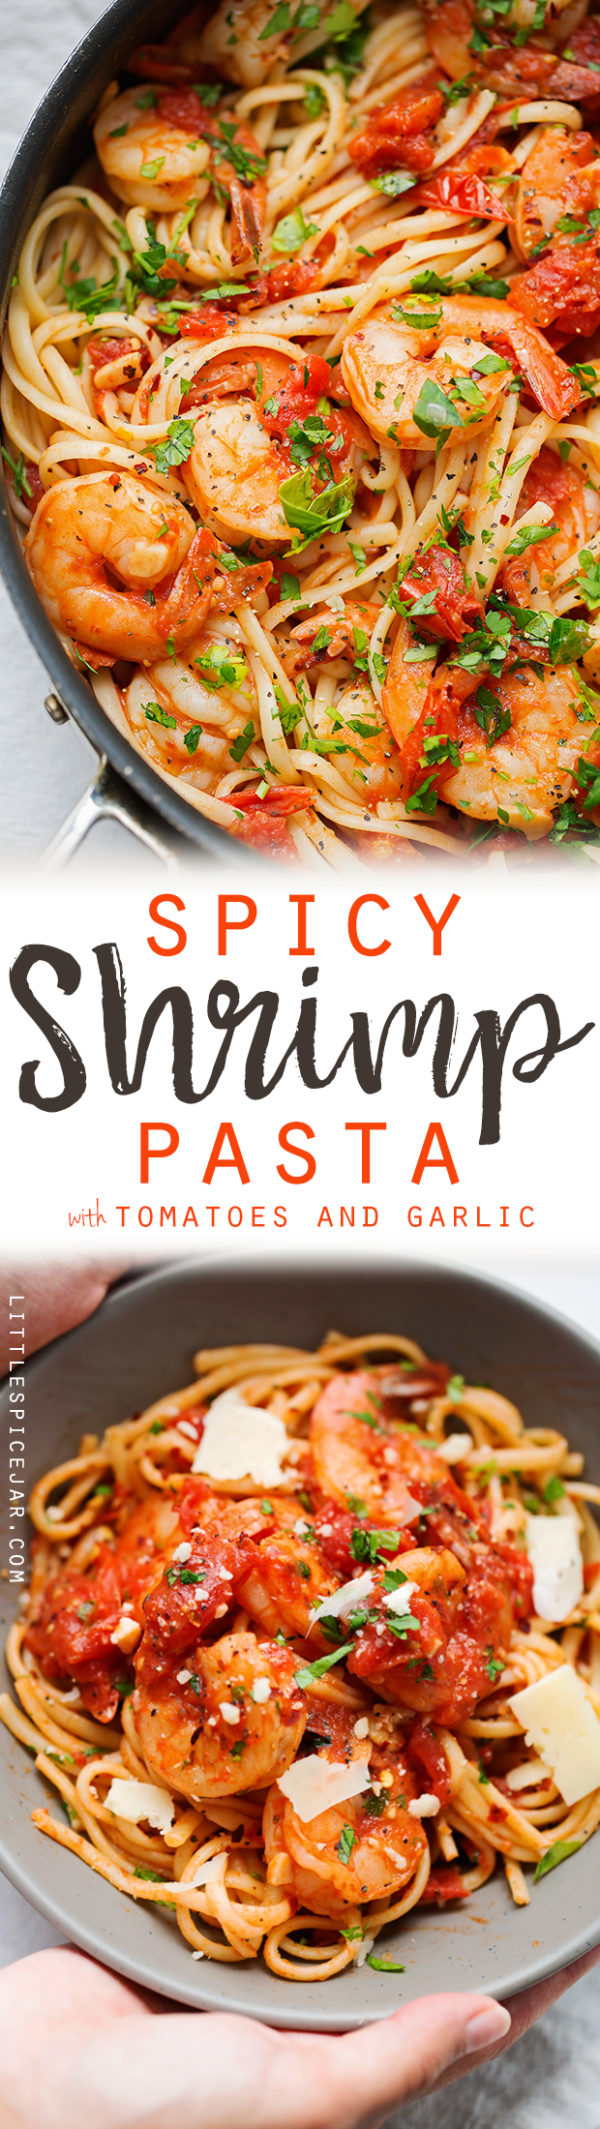 Spicy Shrimp Pasta with Tomatoes and Garlic | Little Spice Jar